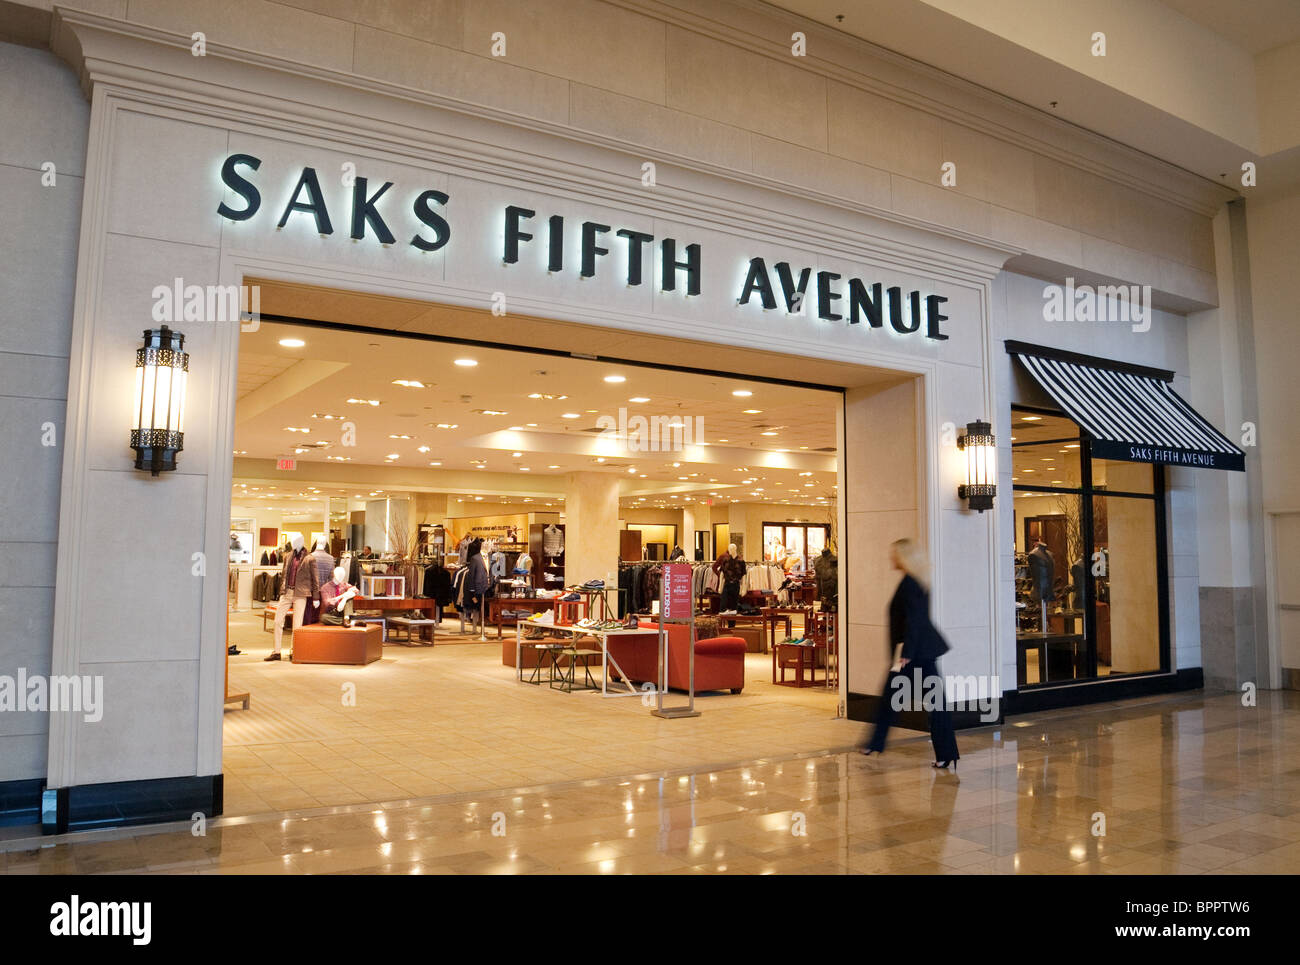 Saks Fifth Avenue, Malls and Retail Wiki